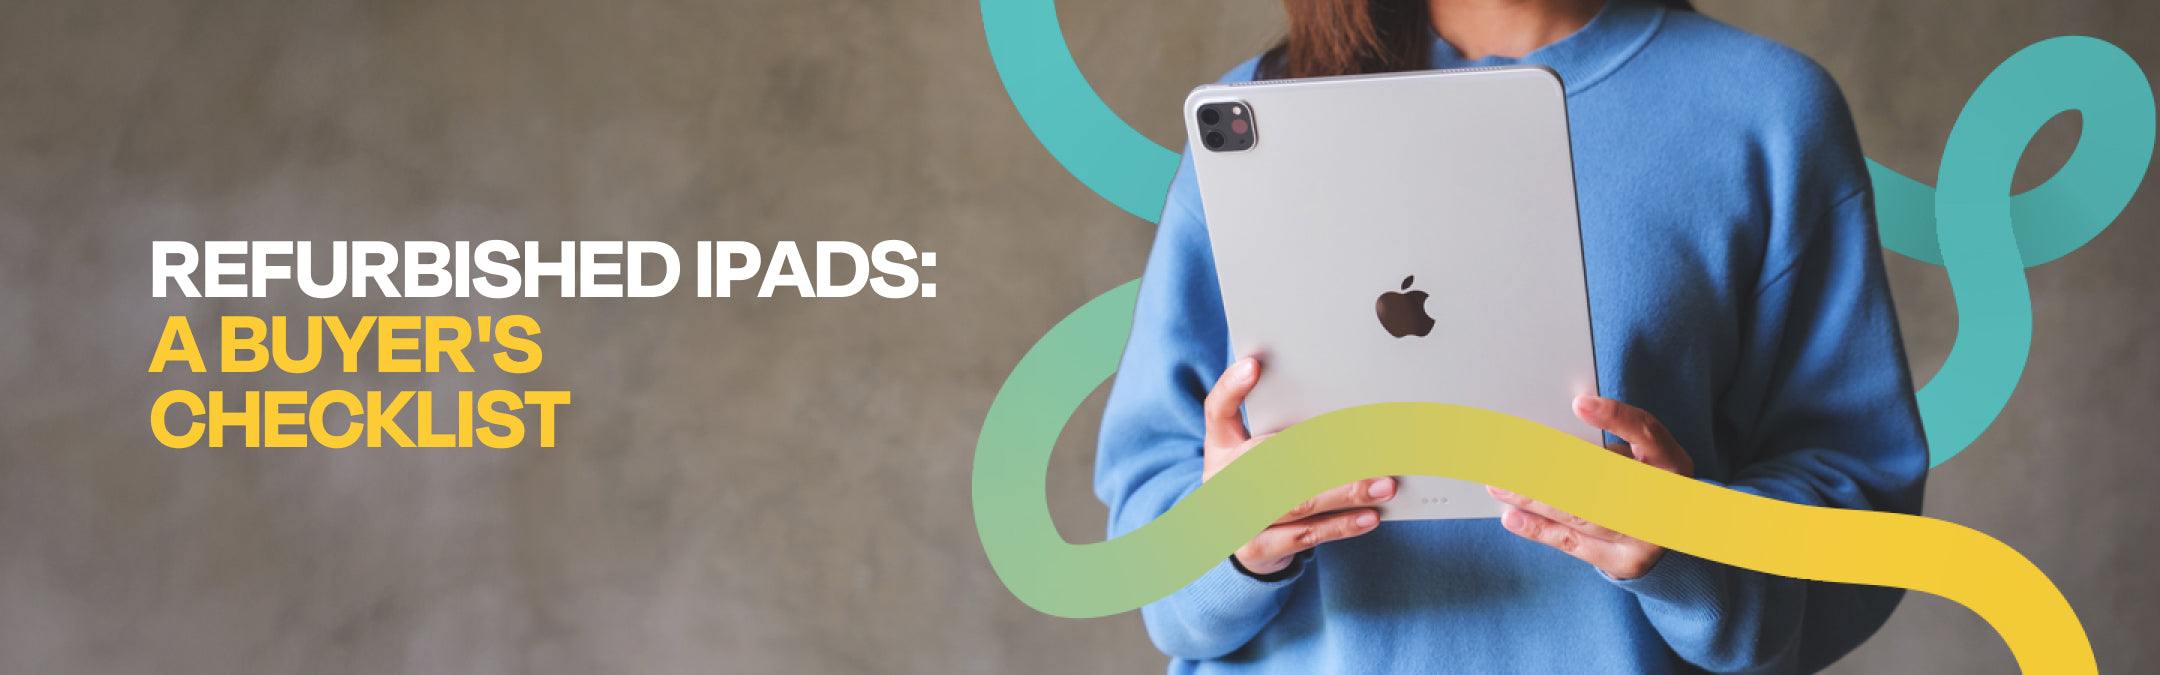 What to Consider When Purchasing Refurbished iPads